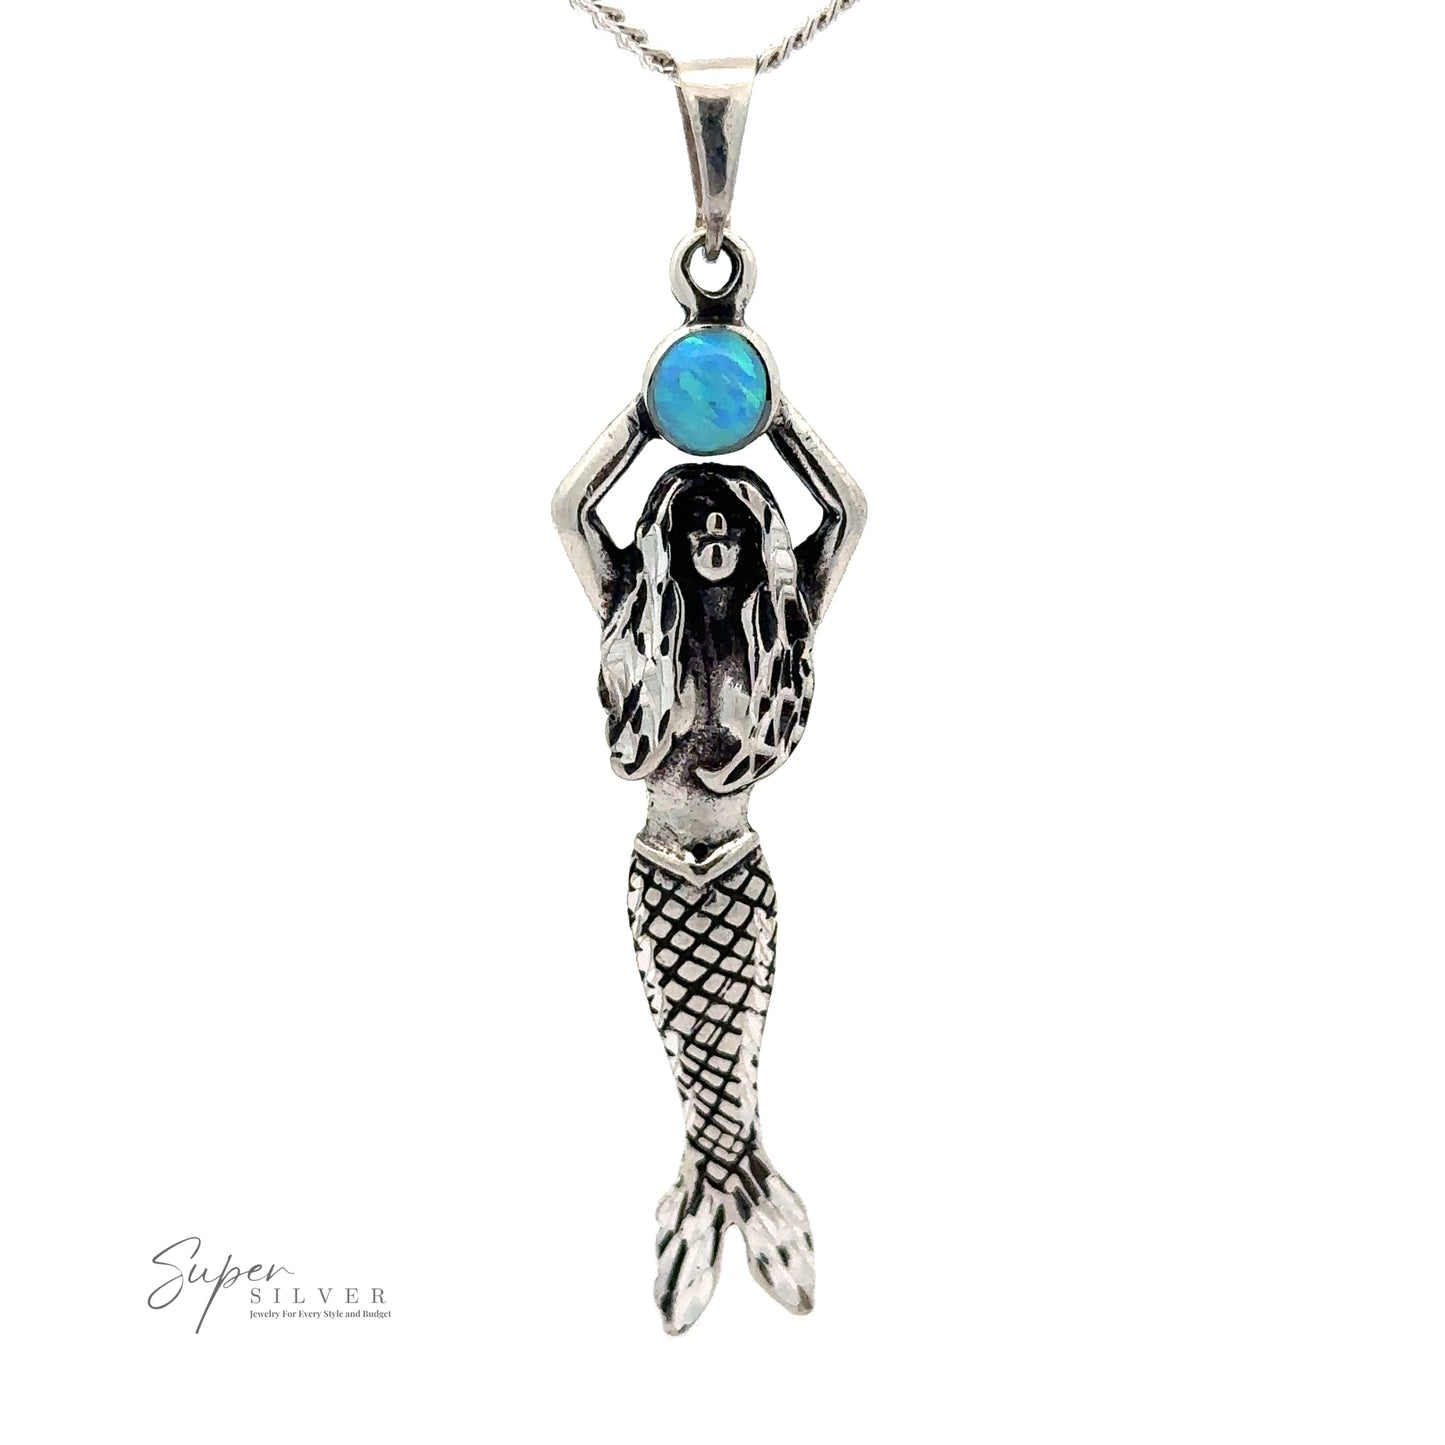 
                  
                    Mermaid And Opal Pendant with intricate details, holding a blue opal stone above her head. Text in the image reads "Super Silver".
                  
                